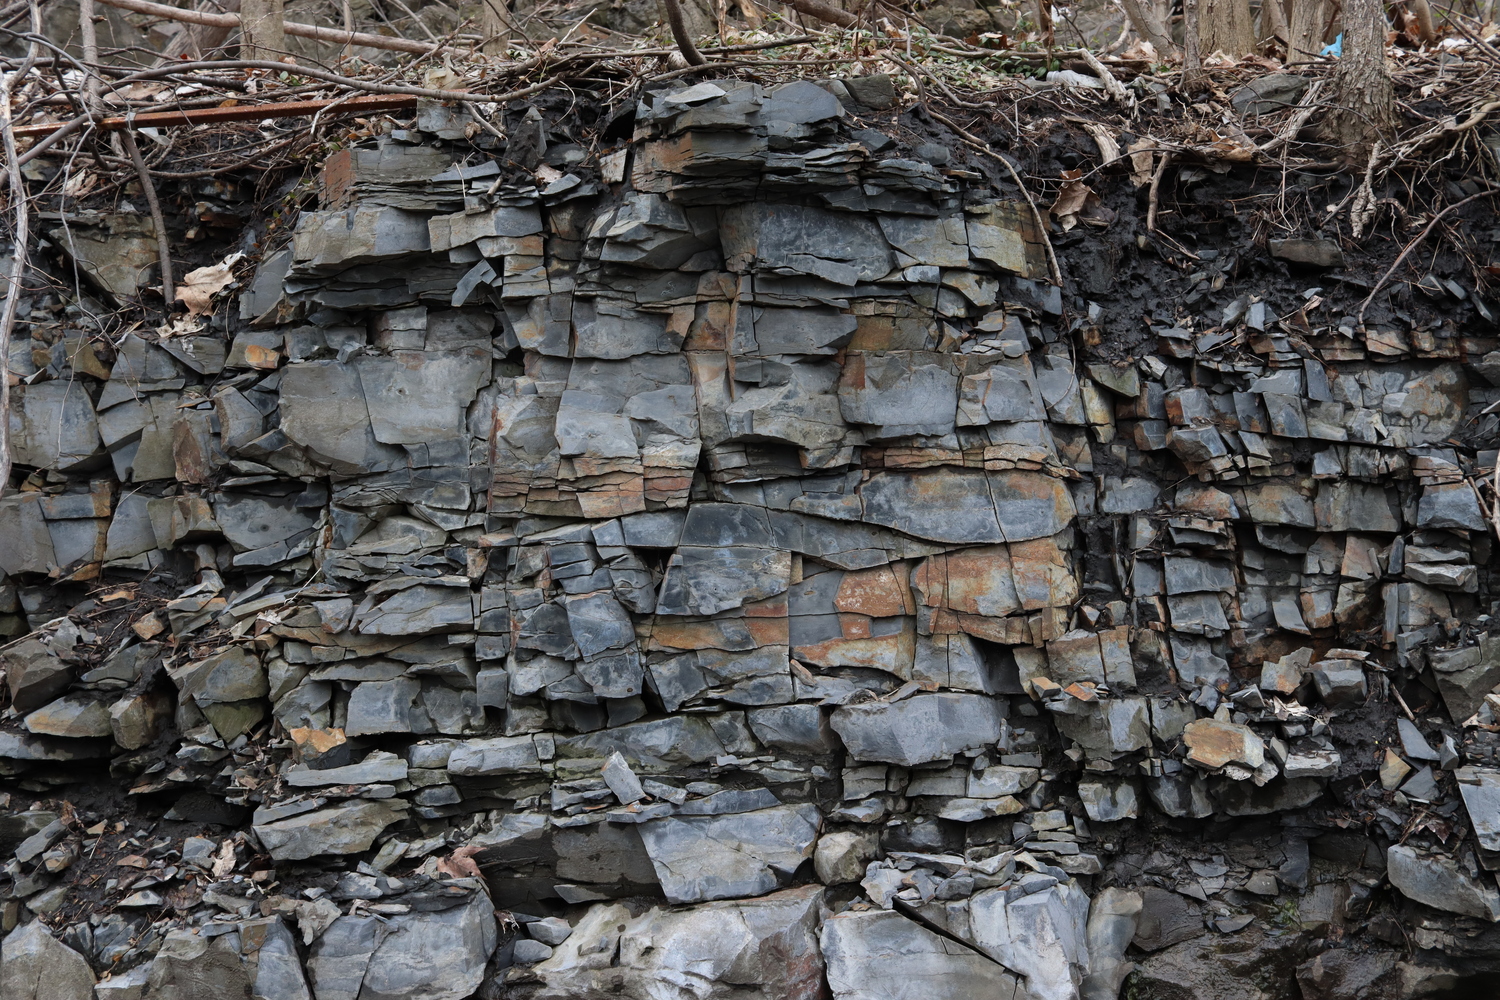 a short wall of natural rock,
all broken up somewhat neatly
along horizontal and vertical lines.
most of the rock is cool grey,
while some parts are warm brown.